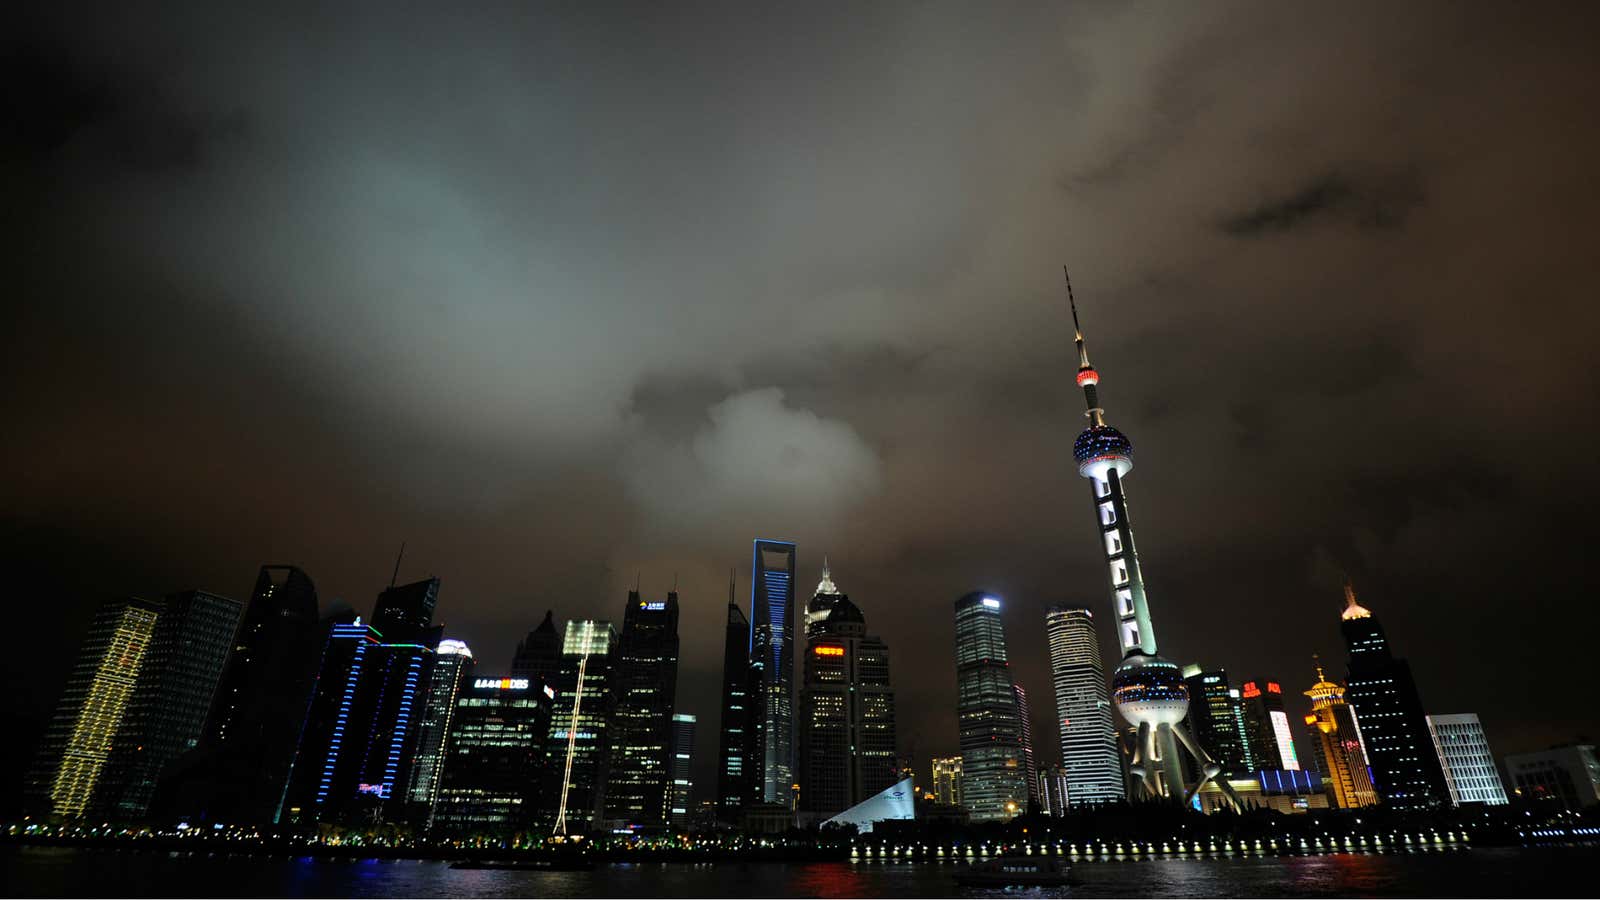 It took a while, but Shanghai’s financial center has become one of the most distinct skylines in the world.